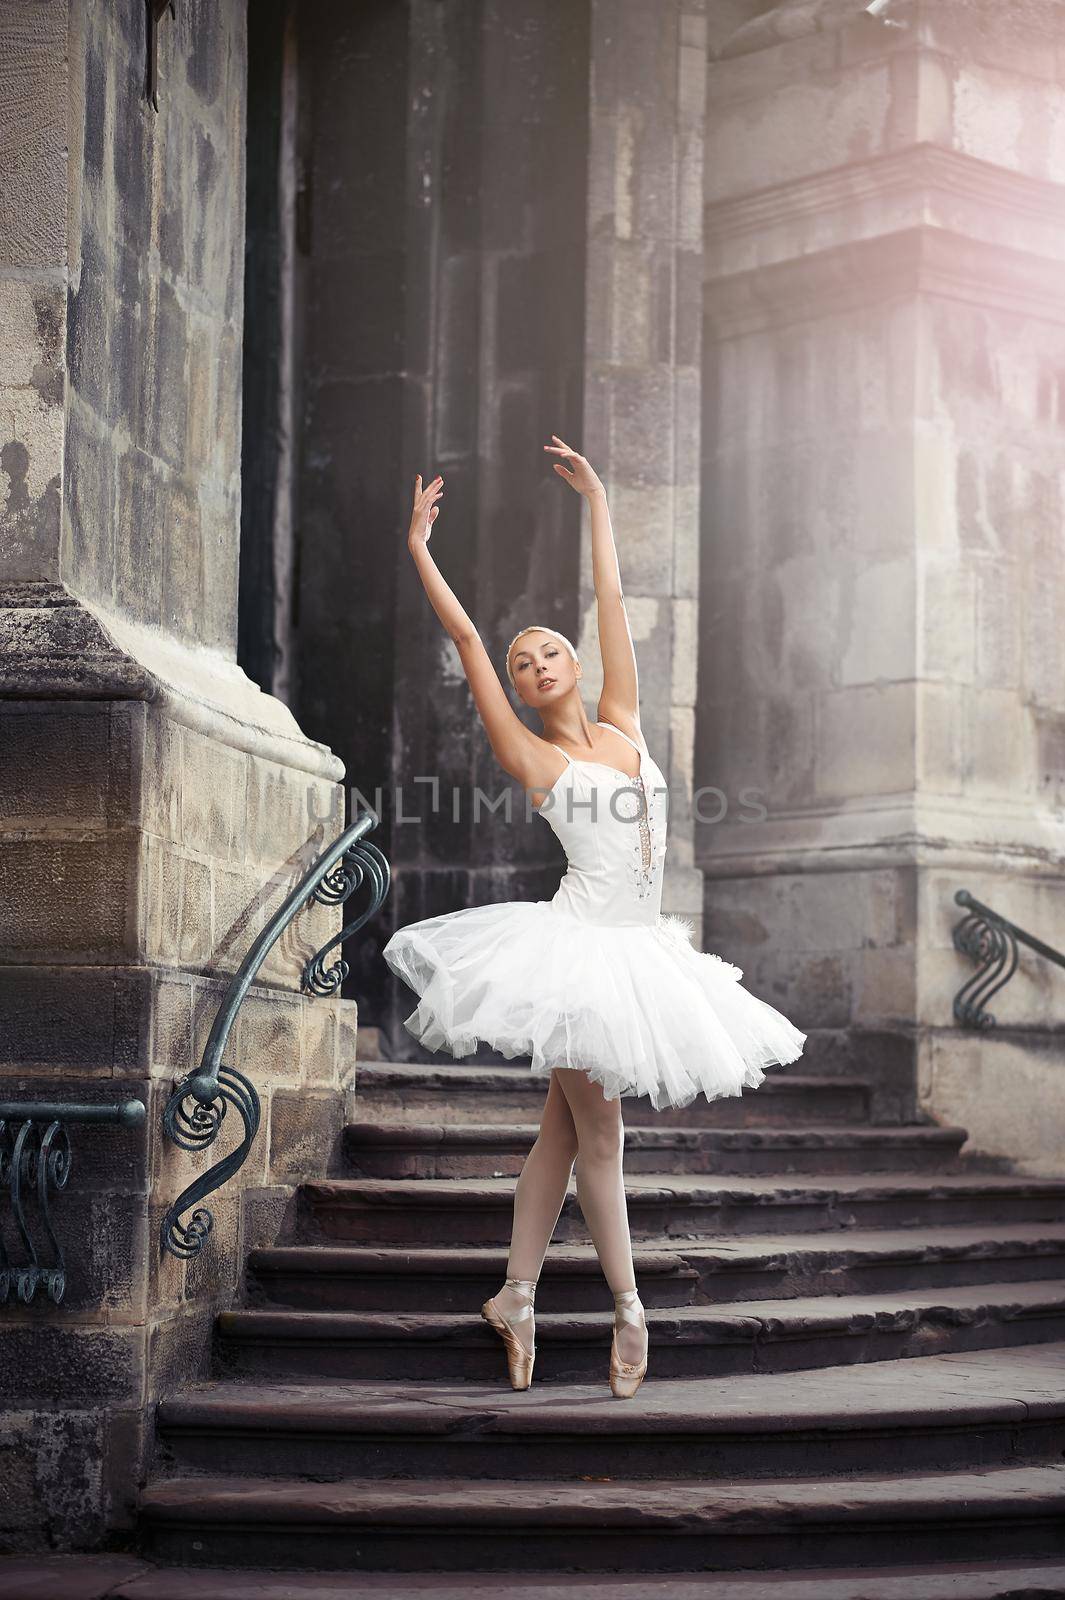 She can teach you grace. Vertical soft focus portrait of a stunning ballet dancer woman performing on the stairway of an old castle